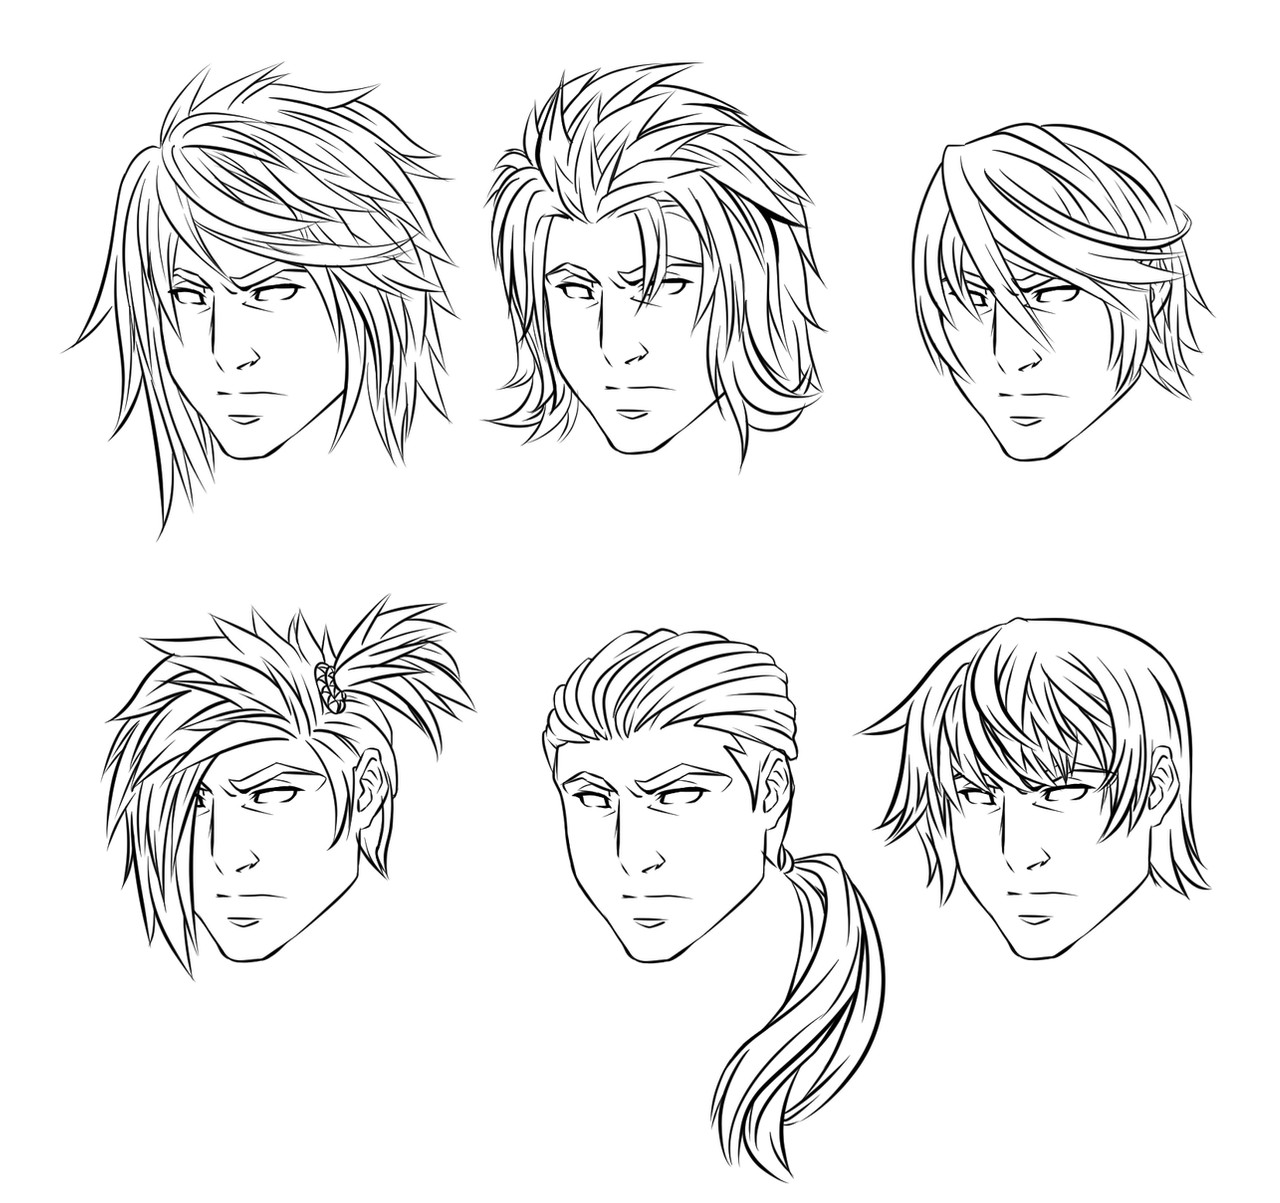 Male Anime Hairstyles
 Anime Male Hairstyles by CrimsonCypher on DeviantArt